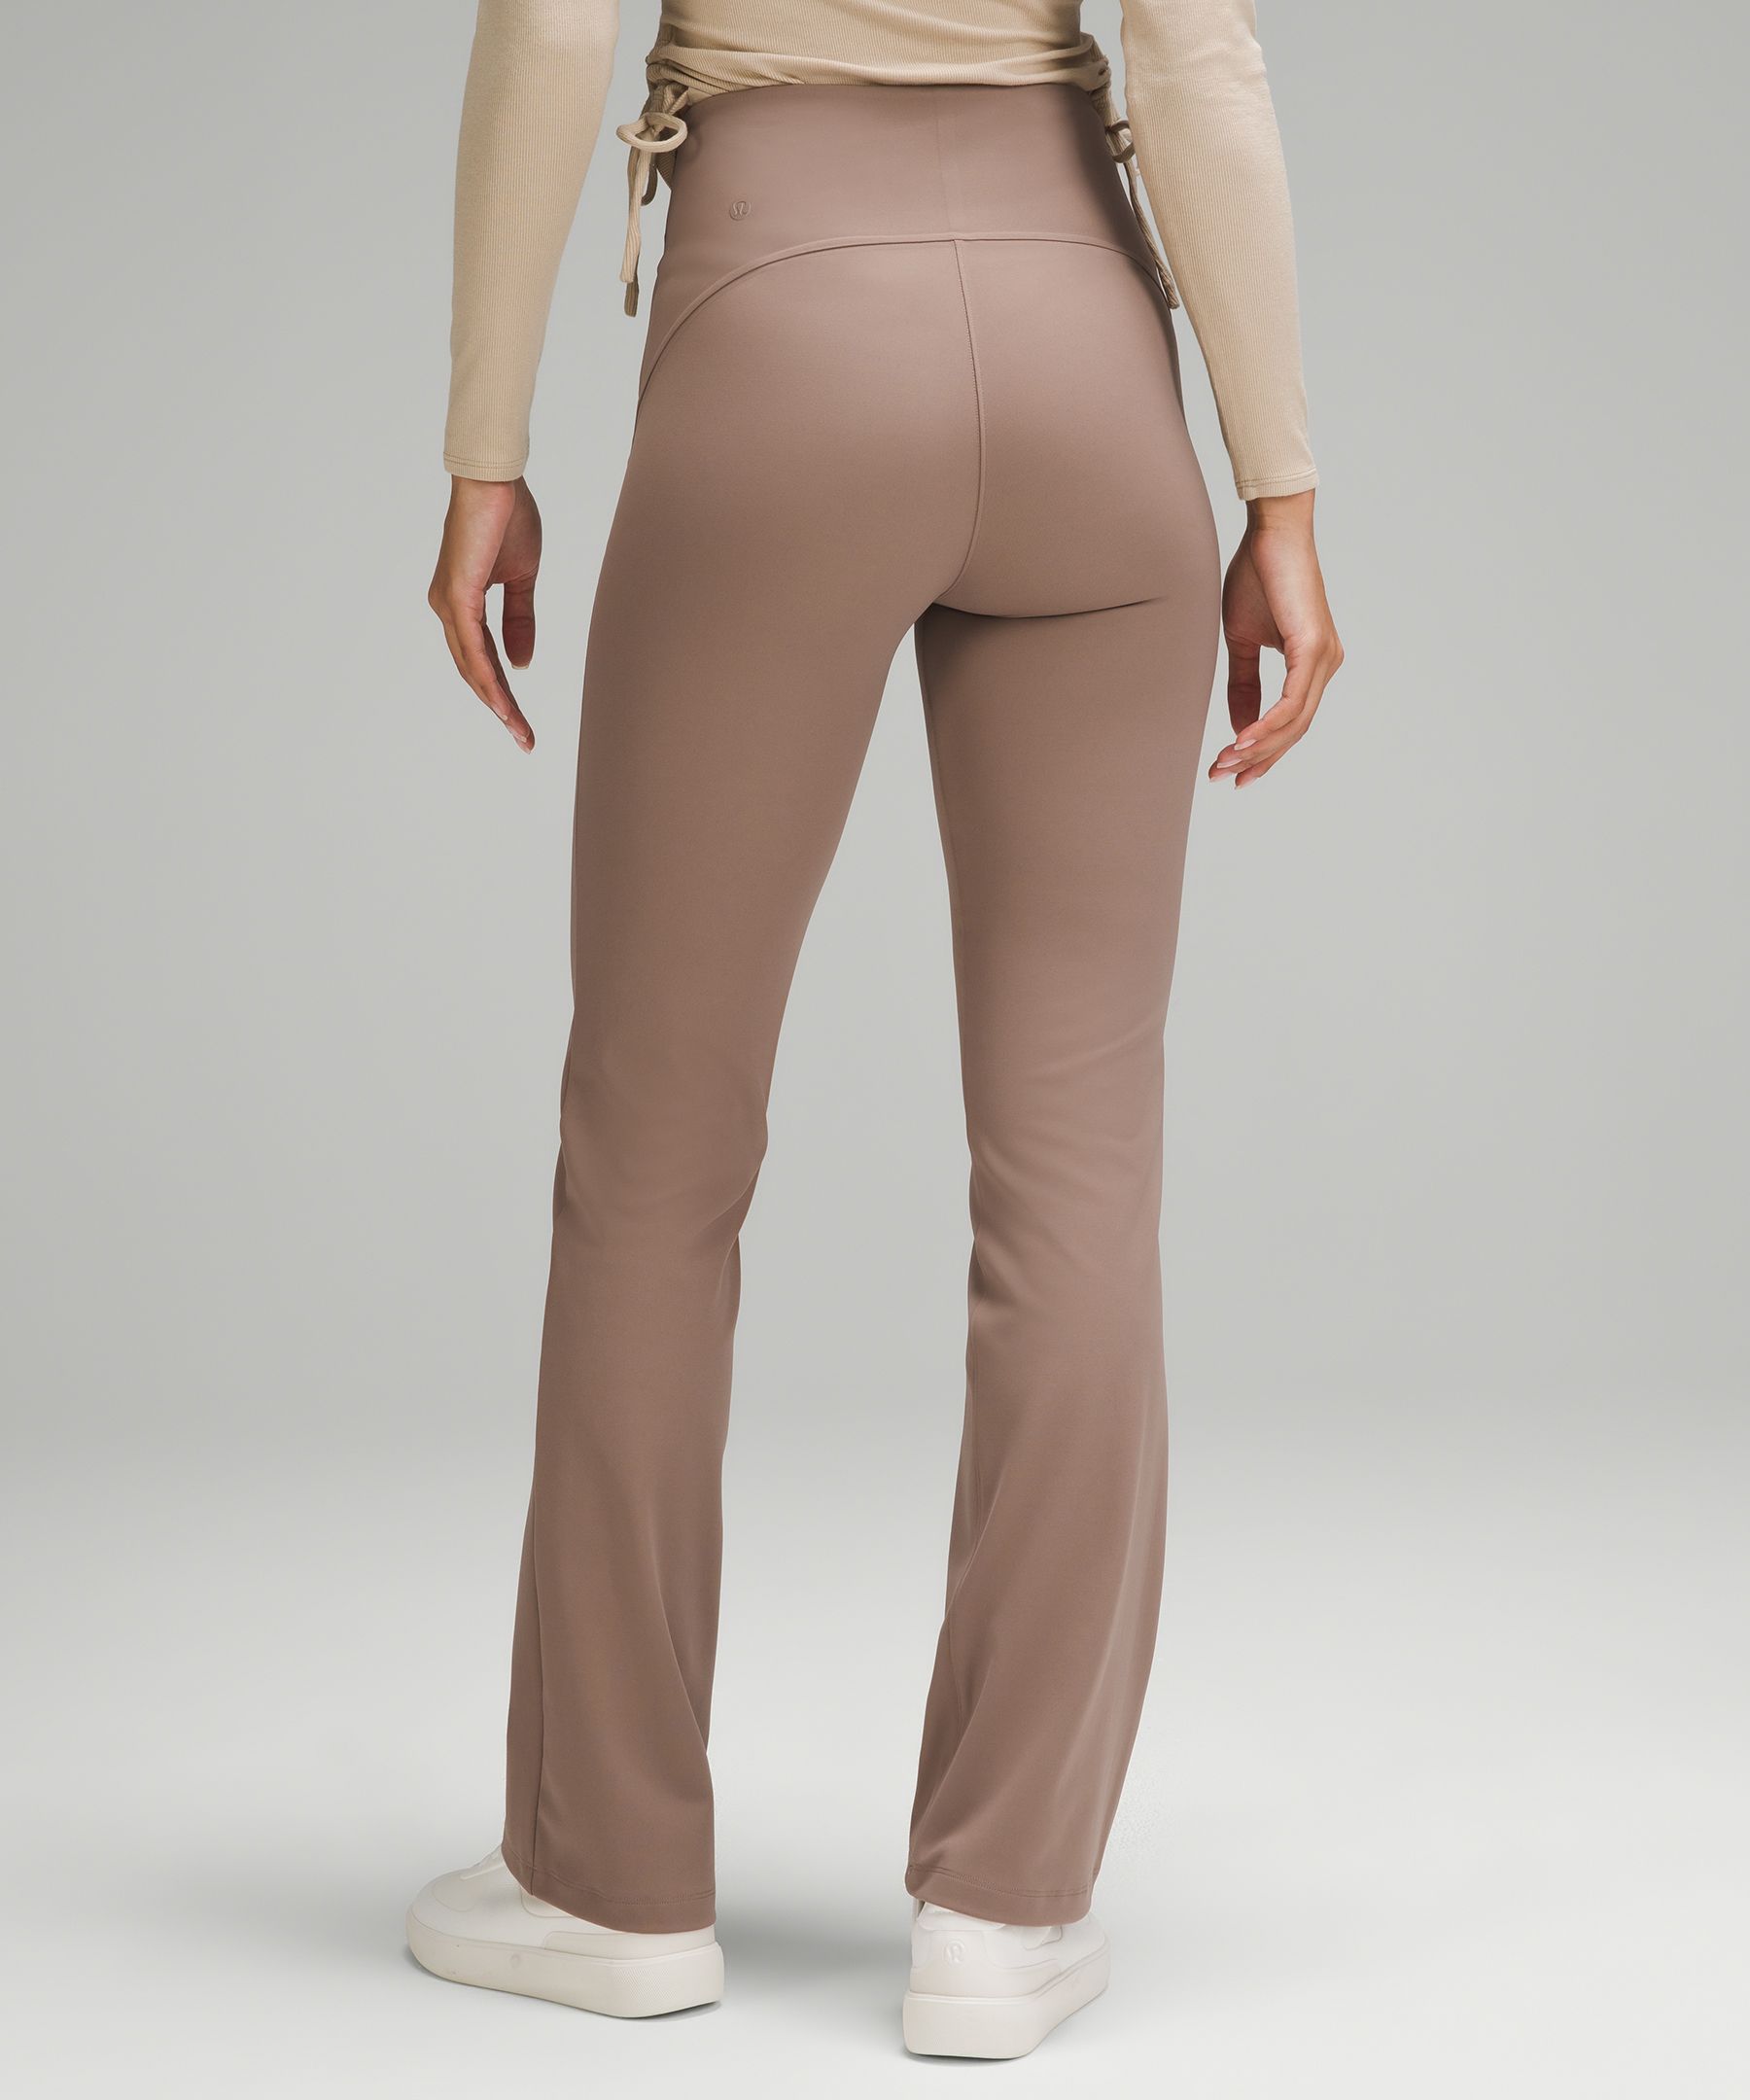 Smooth Fit Pull-On High-Rise Pant, Women's Trousers, lululemon